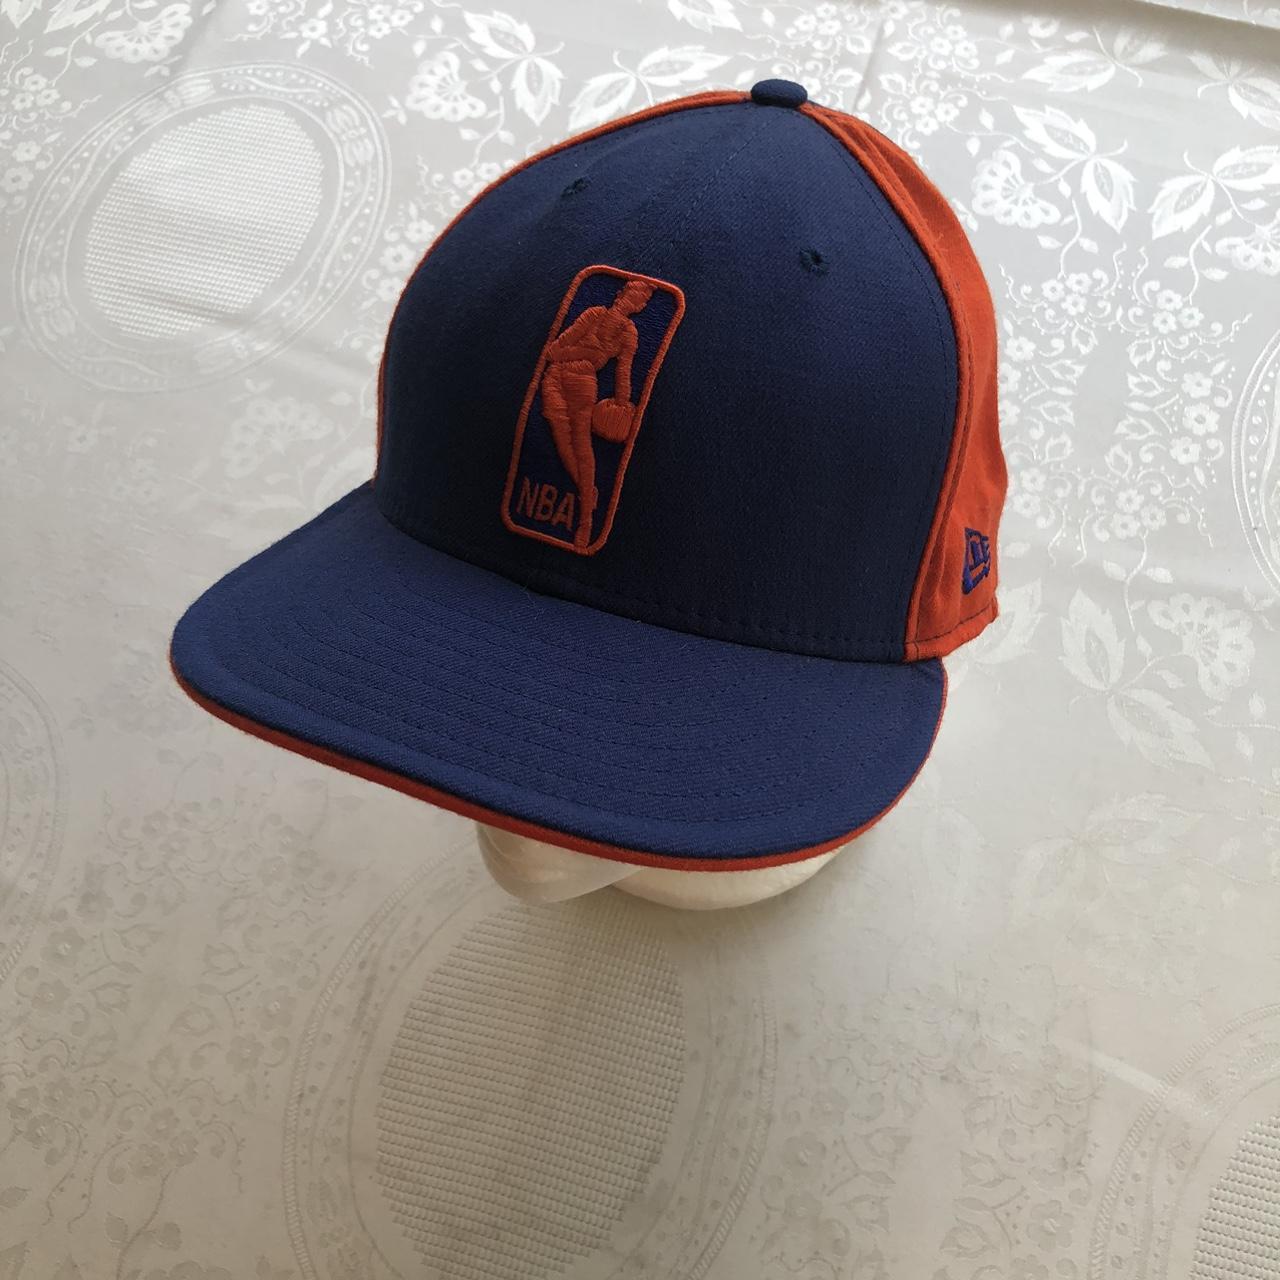 New York Knicks Vintage New Era Wool Fitted Cap Hat - Size: 6 7/8